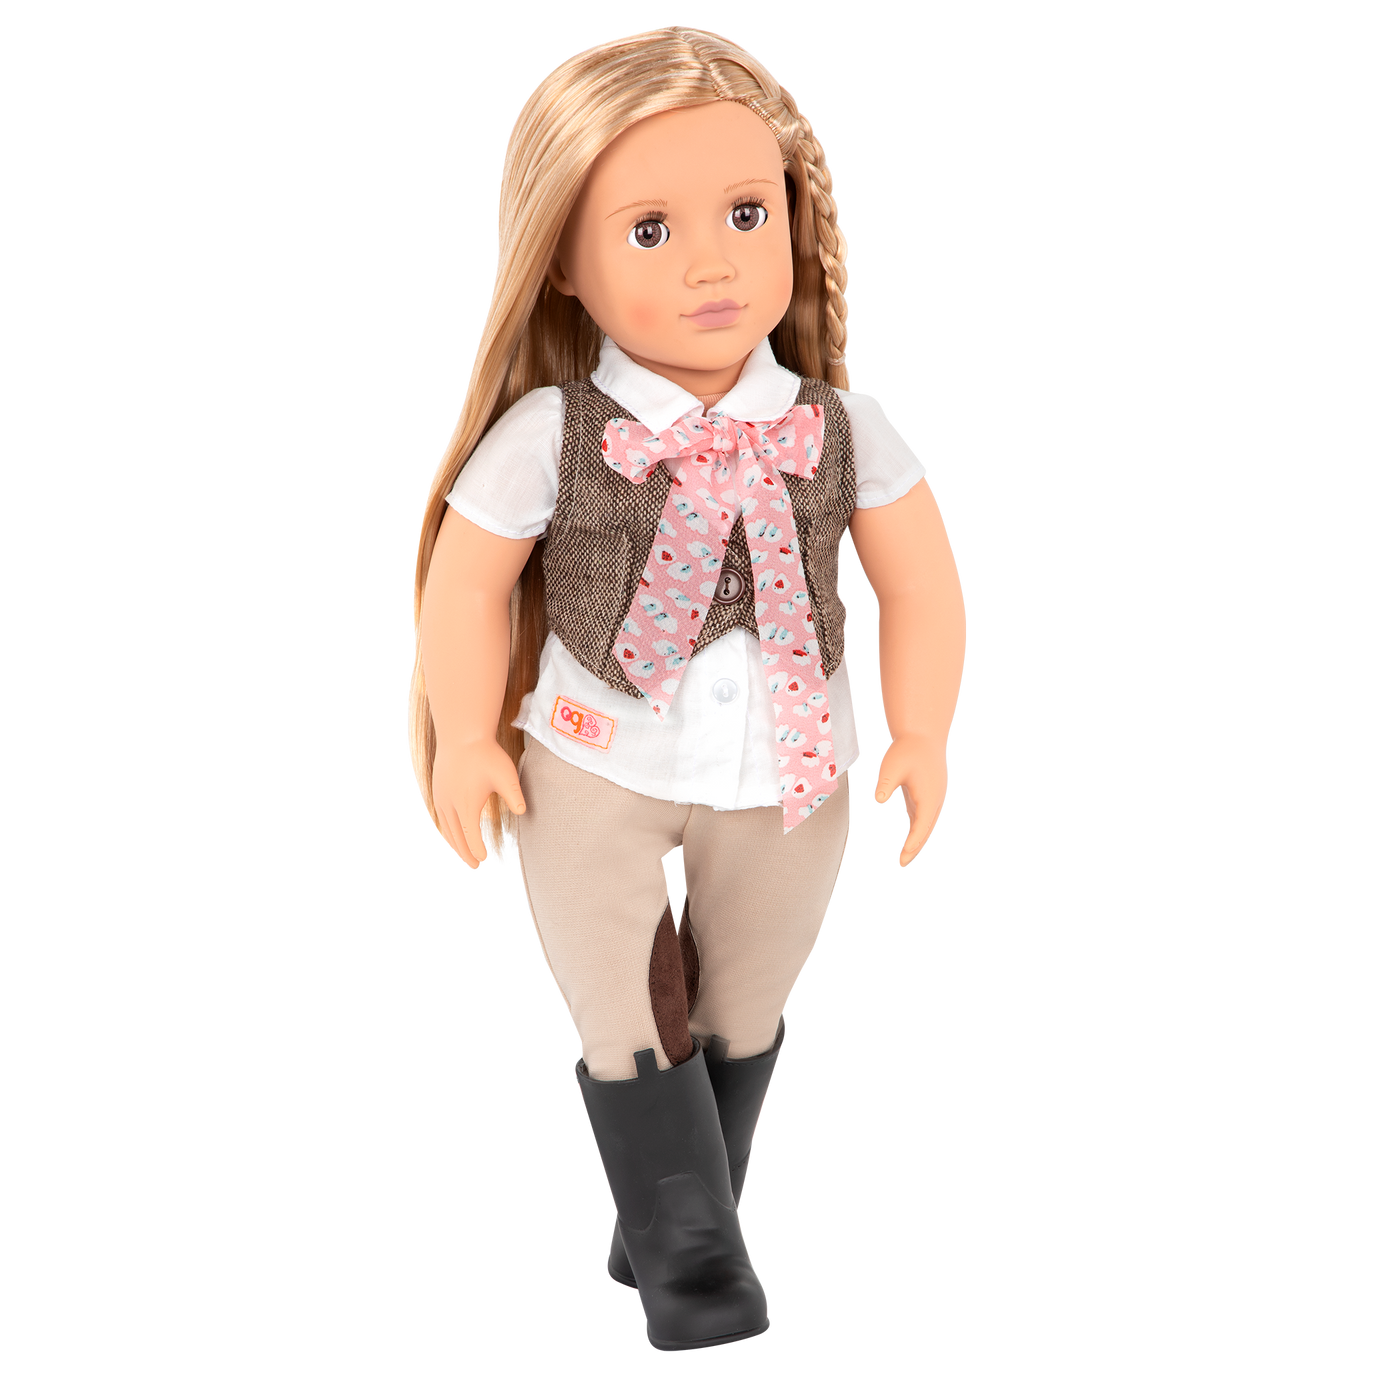 18-inch equestrian doll with blonde hair and brown eyes